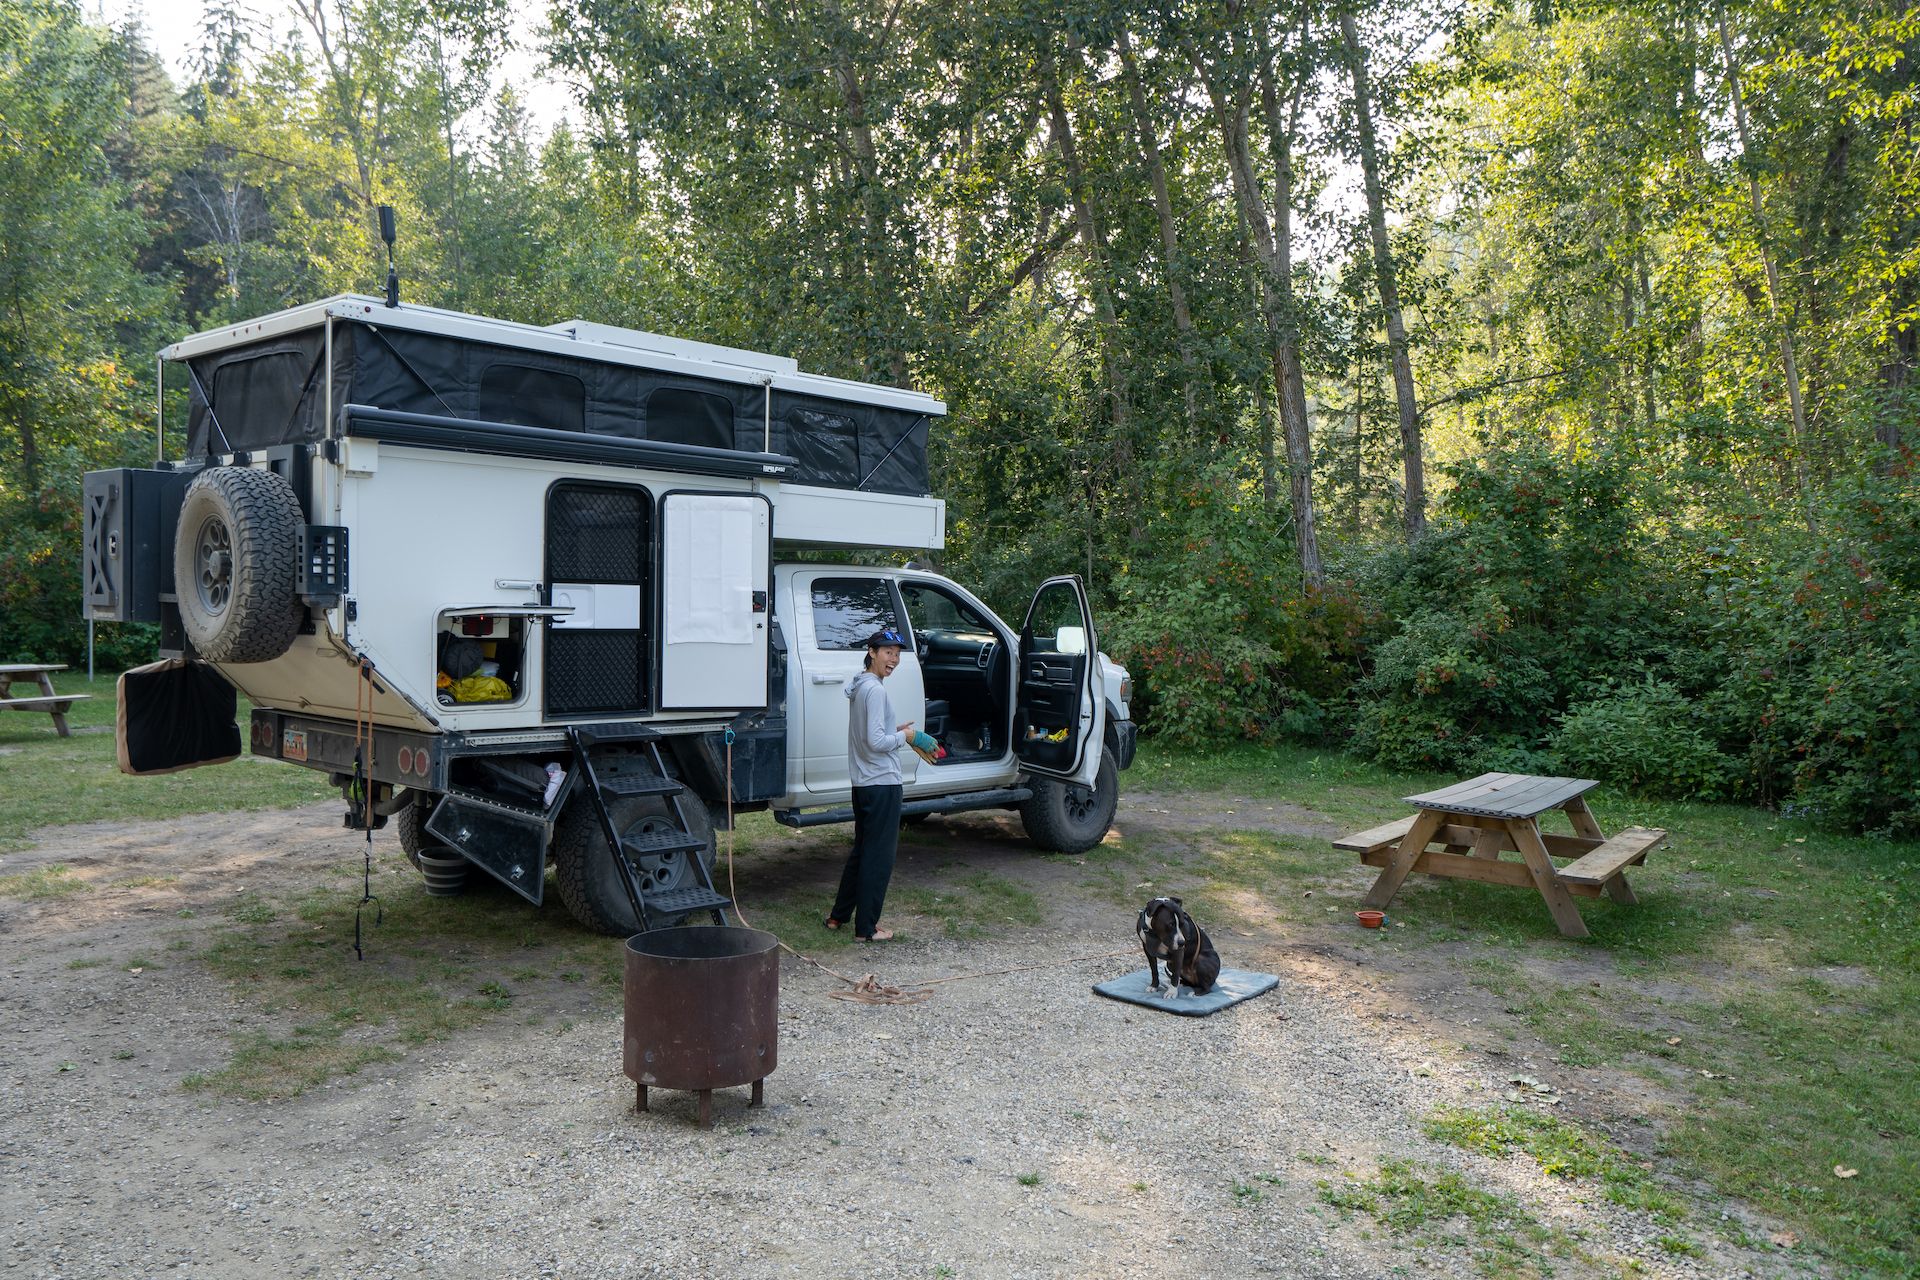 It became difficult to find public land to camp for free after Fort Nelson. So when we need to pay for a place to camp, we like to go to provincial parks or municipal campgrounds. They are usually cheaper and more low key than RV Parks.